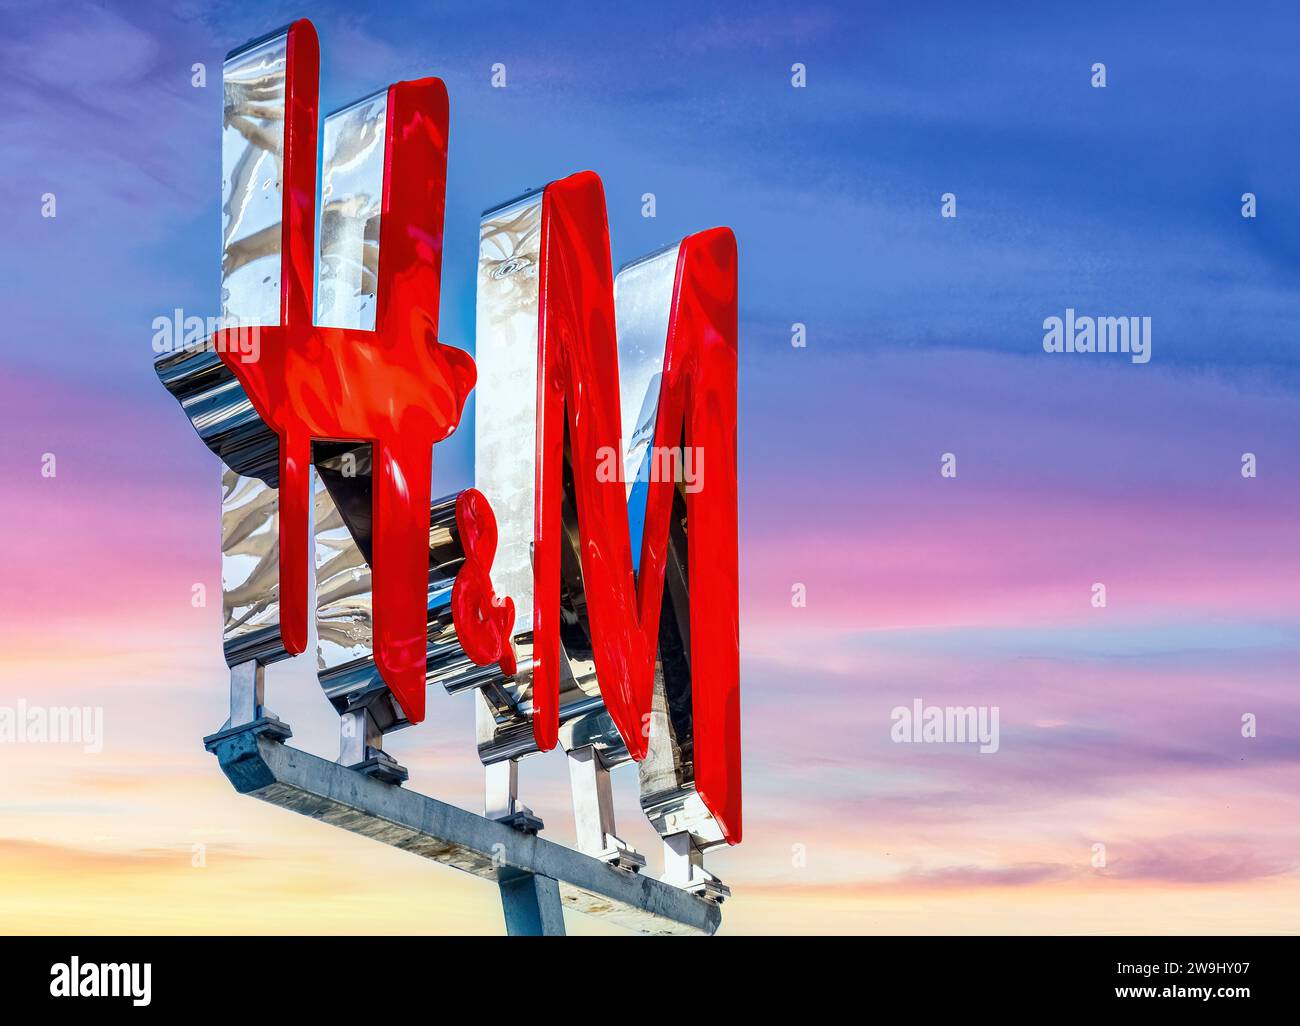 Toronto, Ontario, Canada-September 6, 2019: H&M red store sign: A Swedish multinational retail-clothing company, known for its fast-fashion clothing f Stock Photo